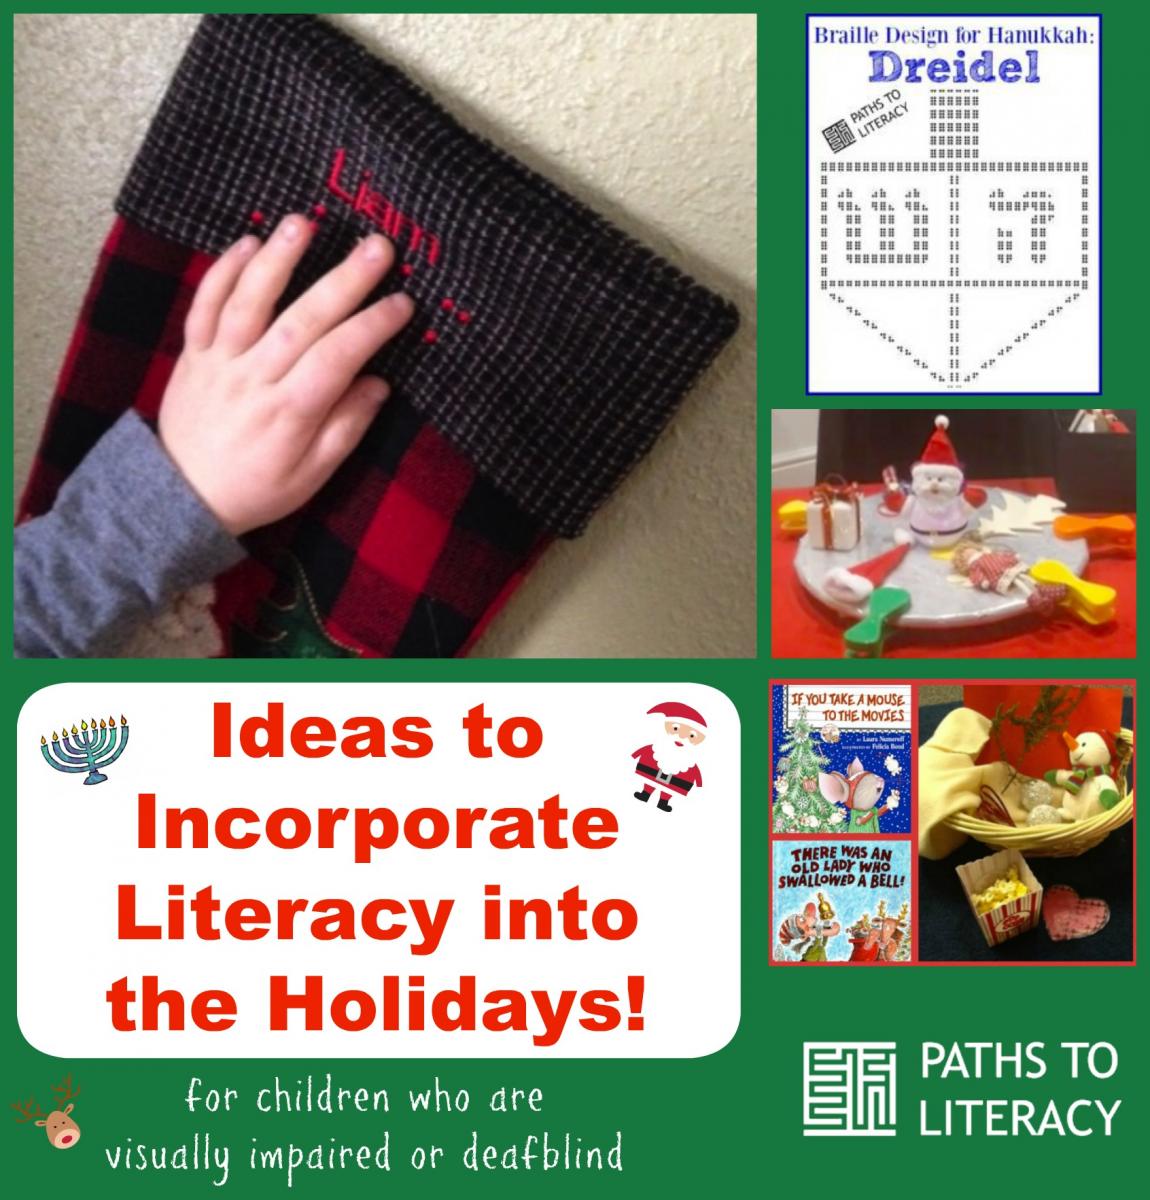 Collage for incorporating literacy into the holidays